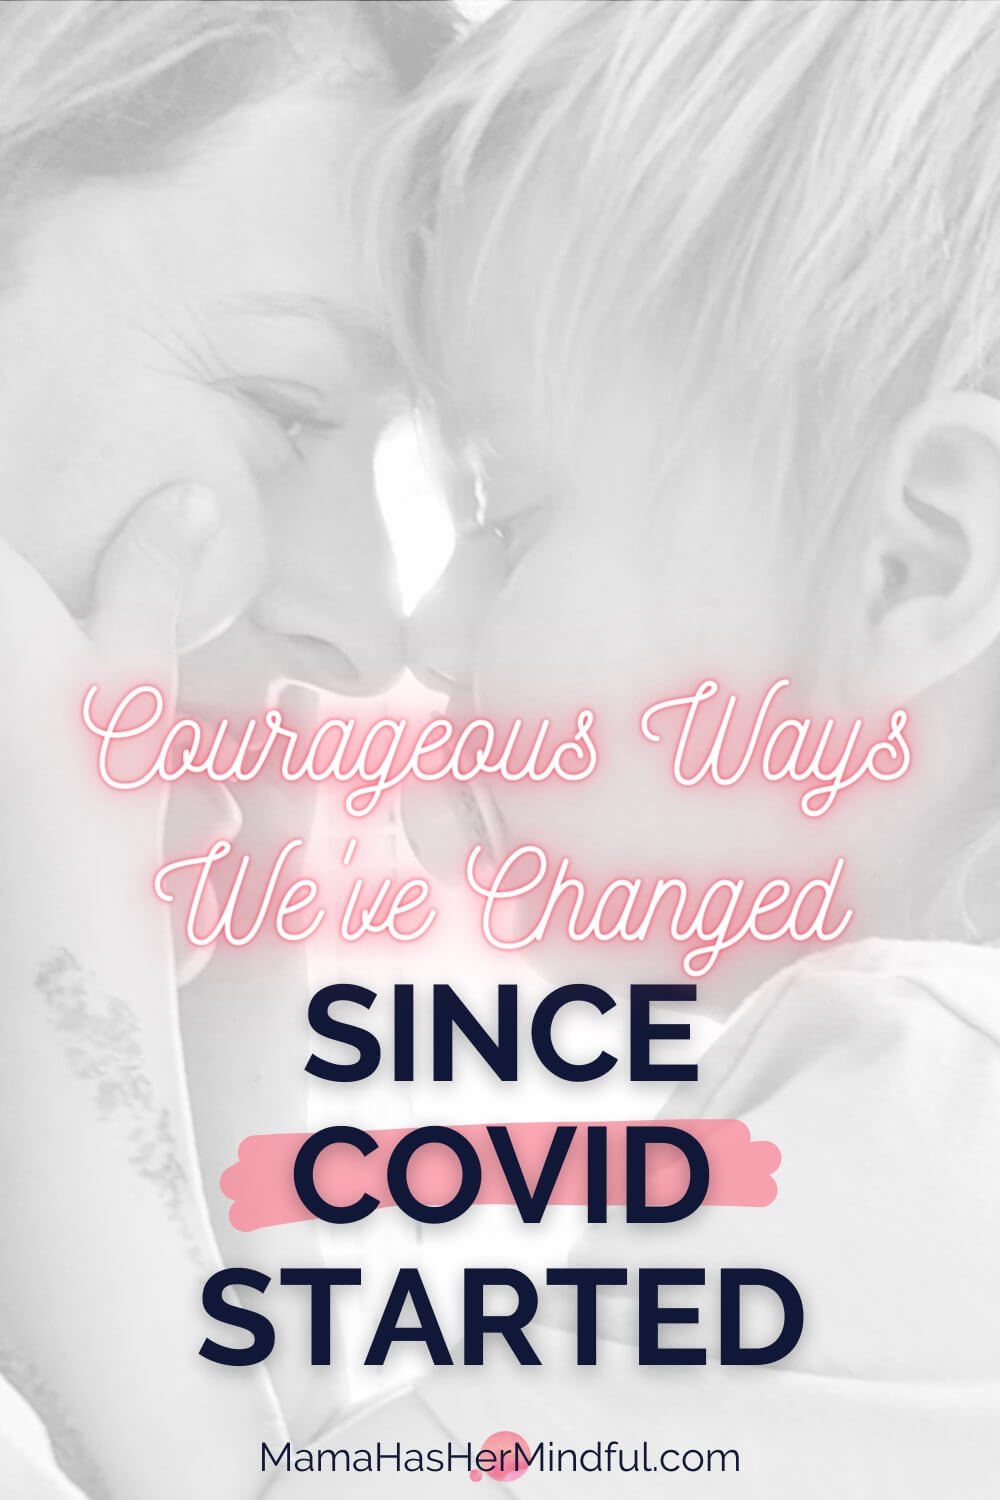 One Year Later: Honoring How We’ve Changed Since COVID Started